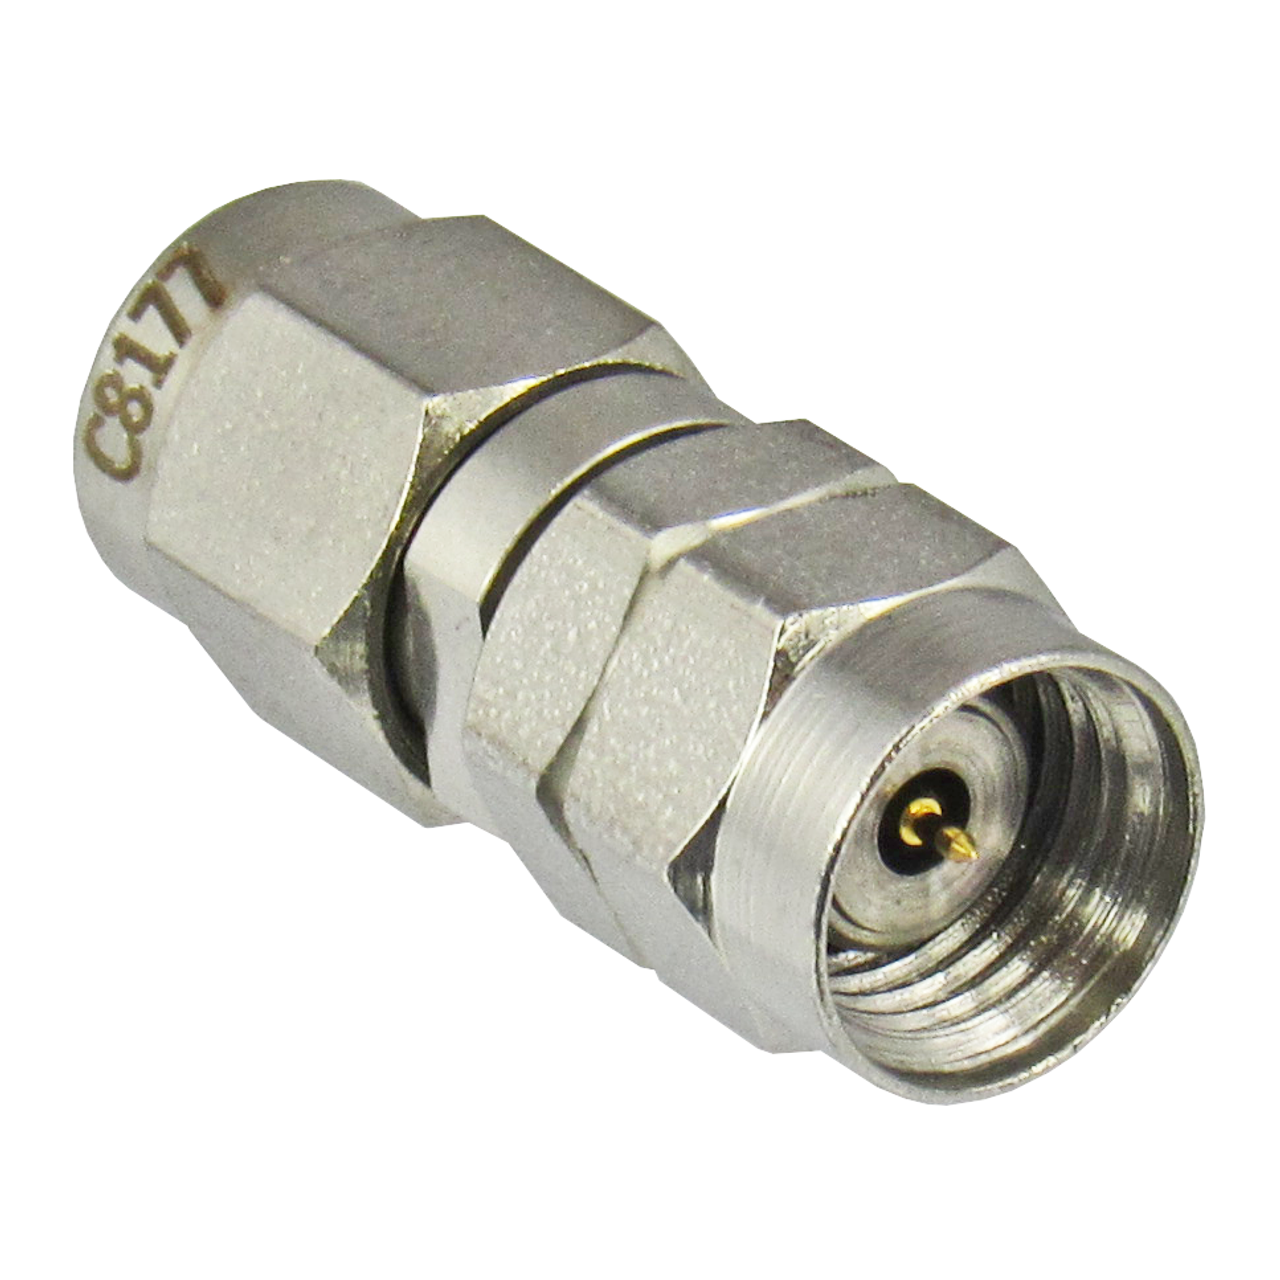 C8177 1.85 Male to SMA Male Adapter Centric RF